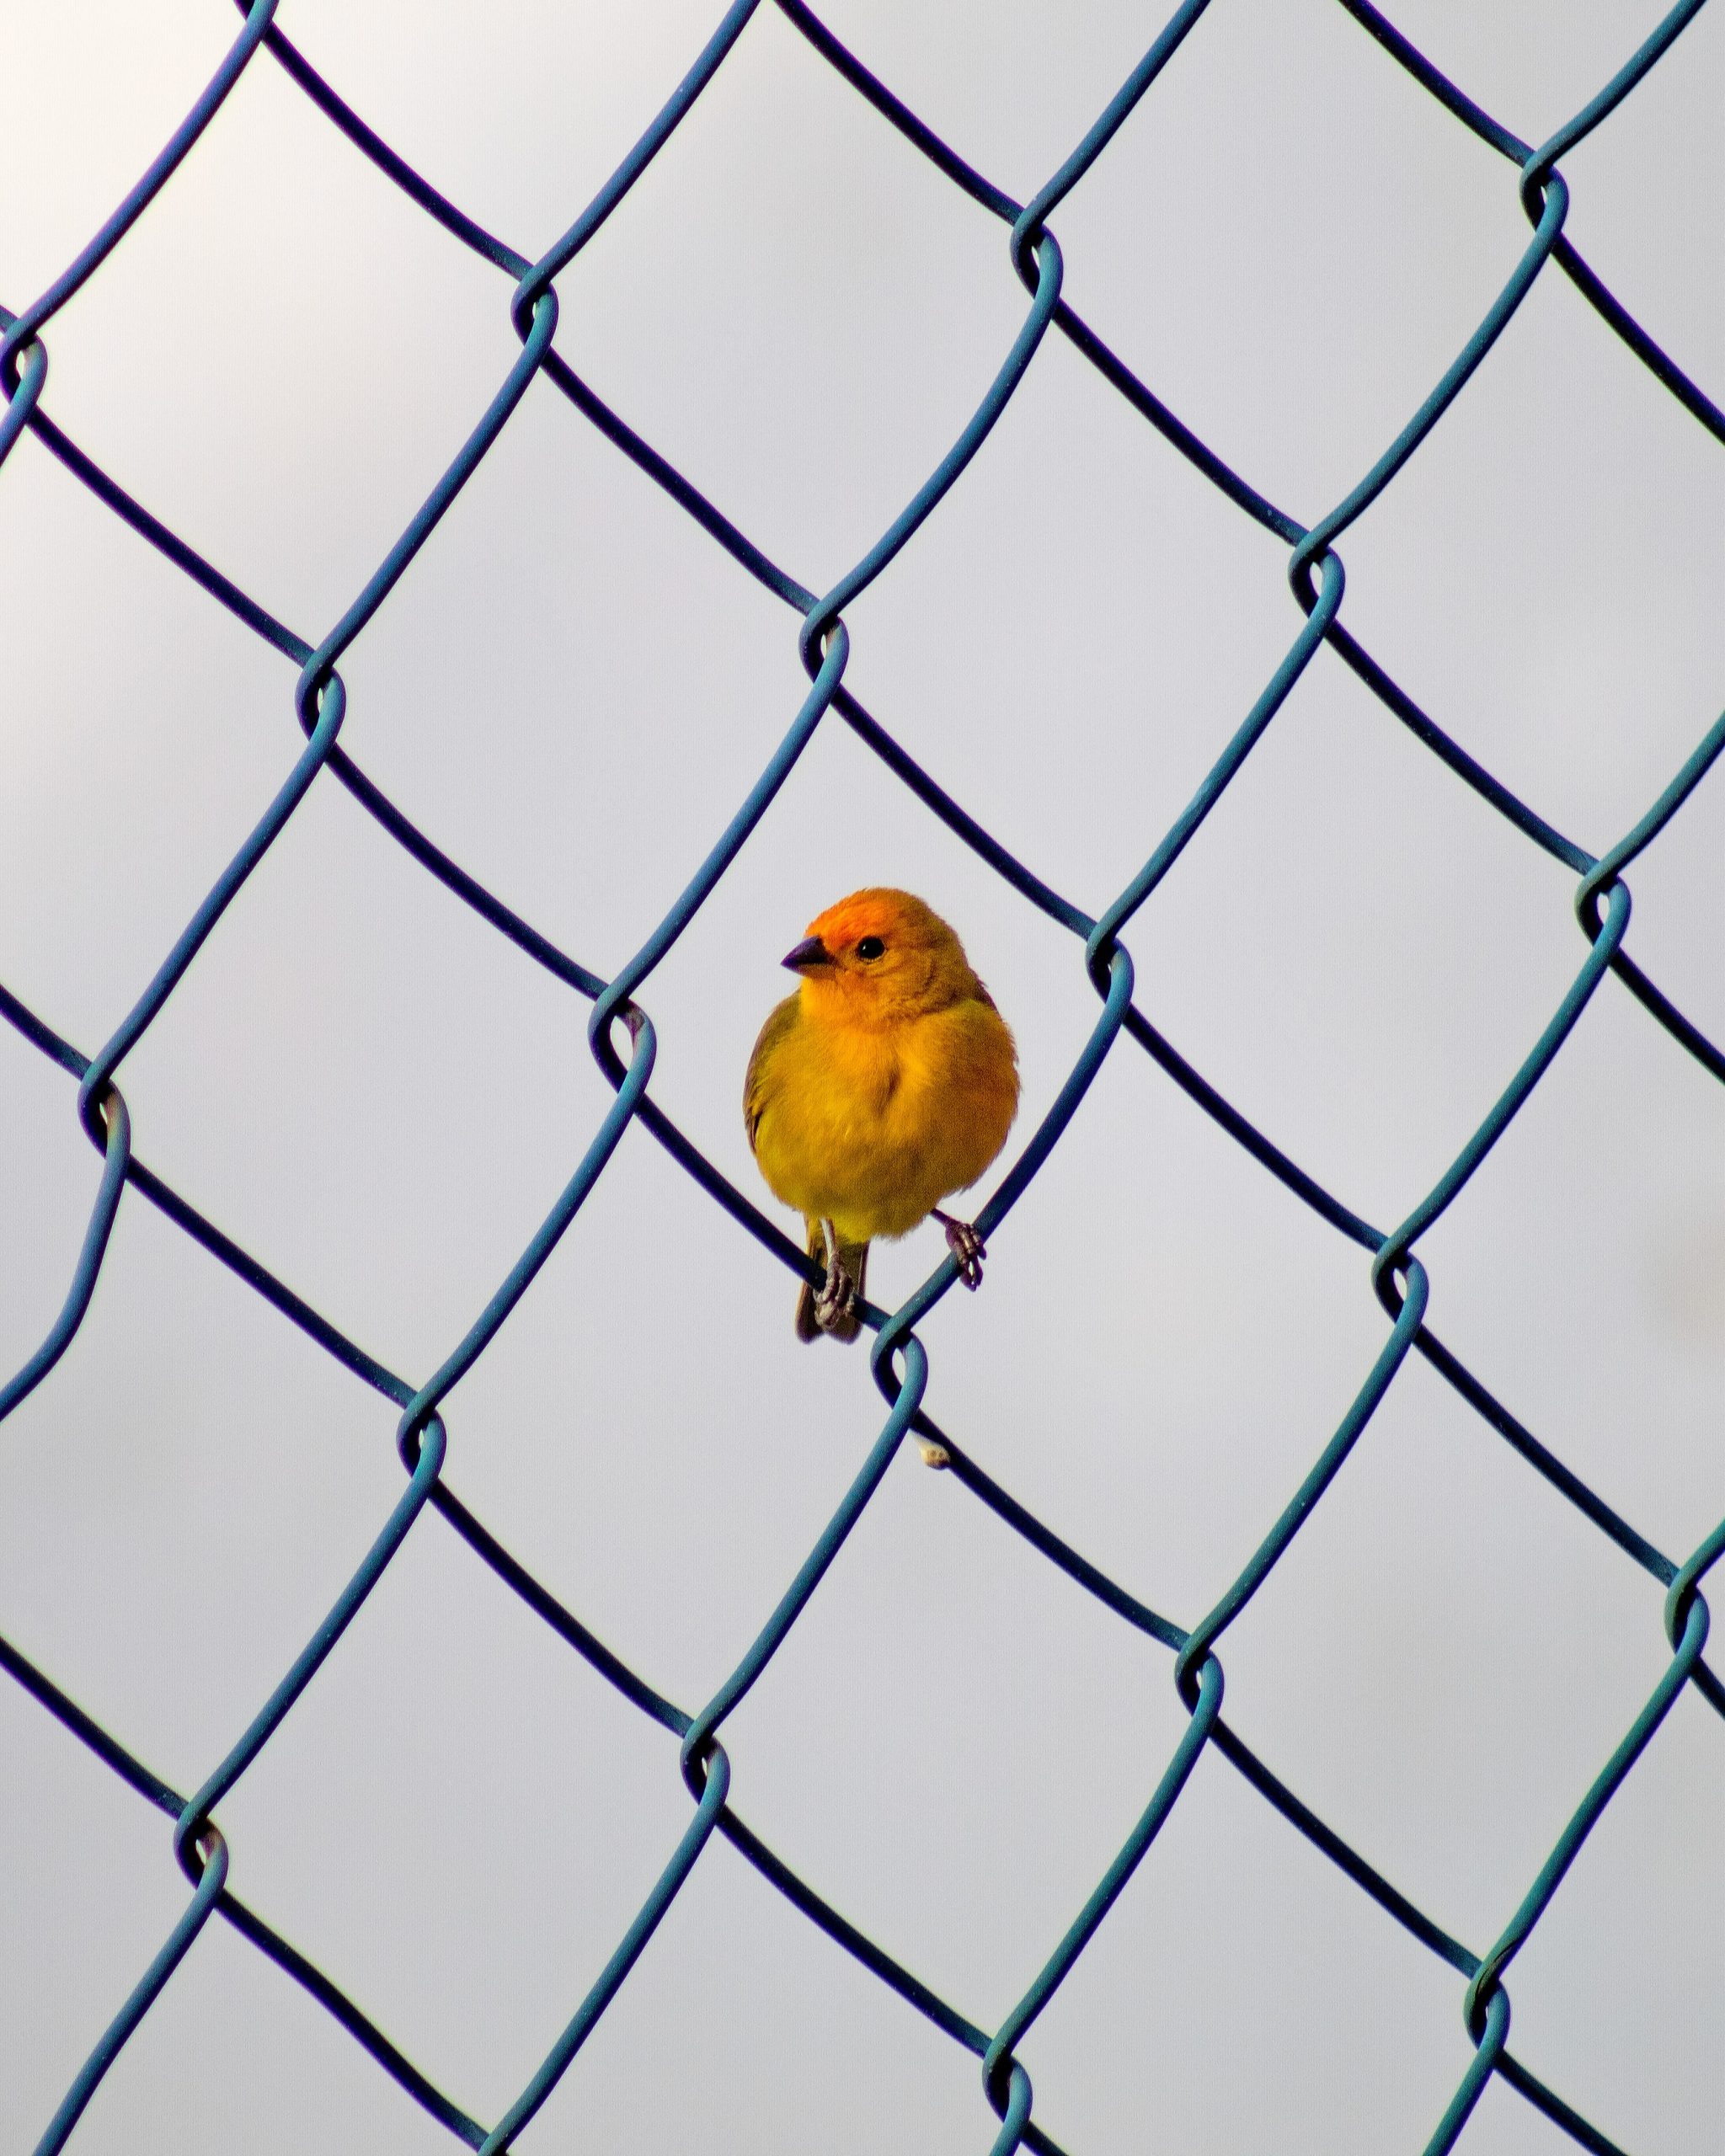 A bird sitting on a wired mesh about to fly.